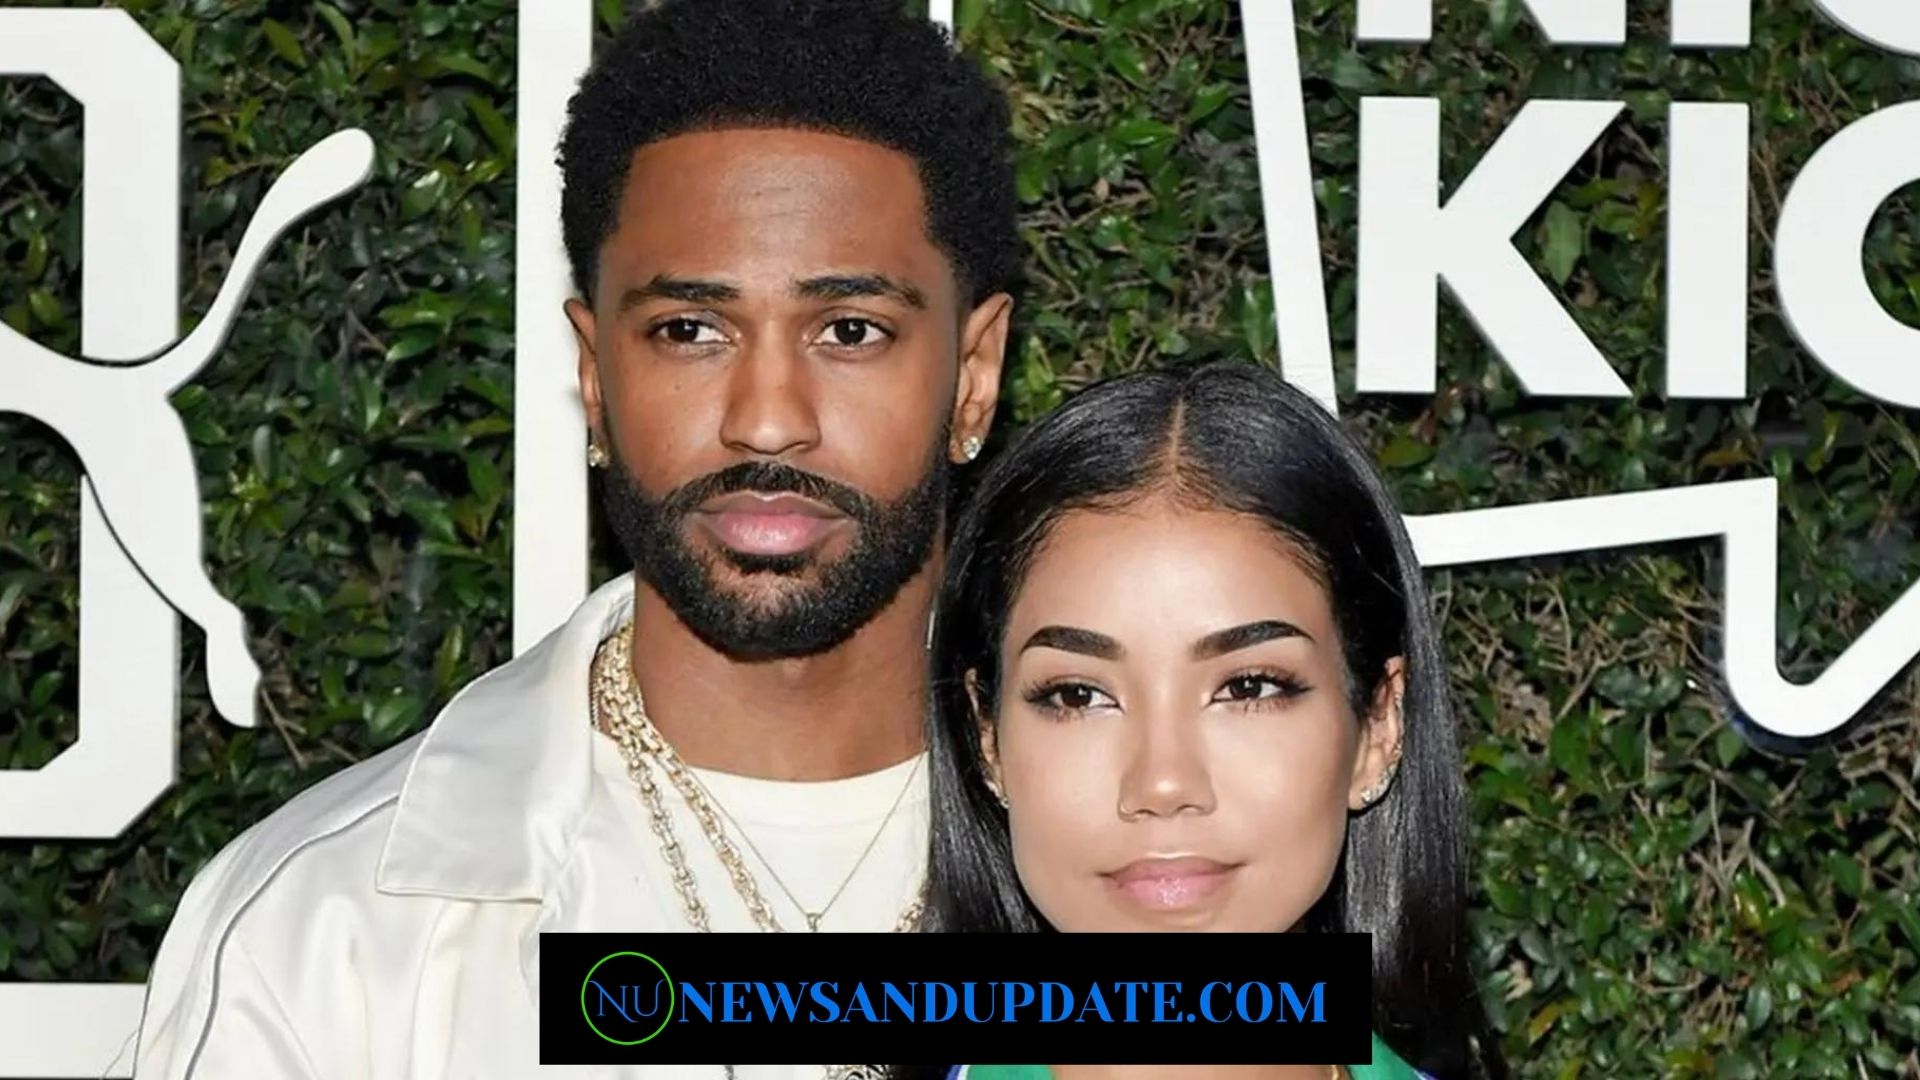 Who Is Jhene Aiko Dating? Expecting First Child With Partner Big Sean